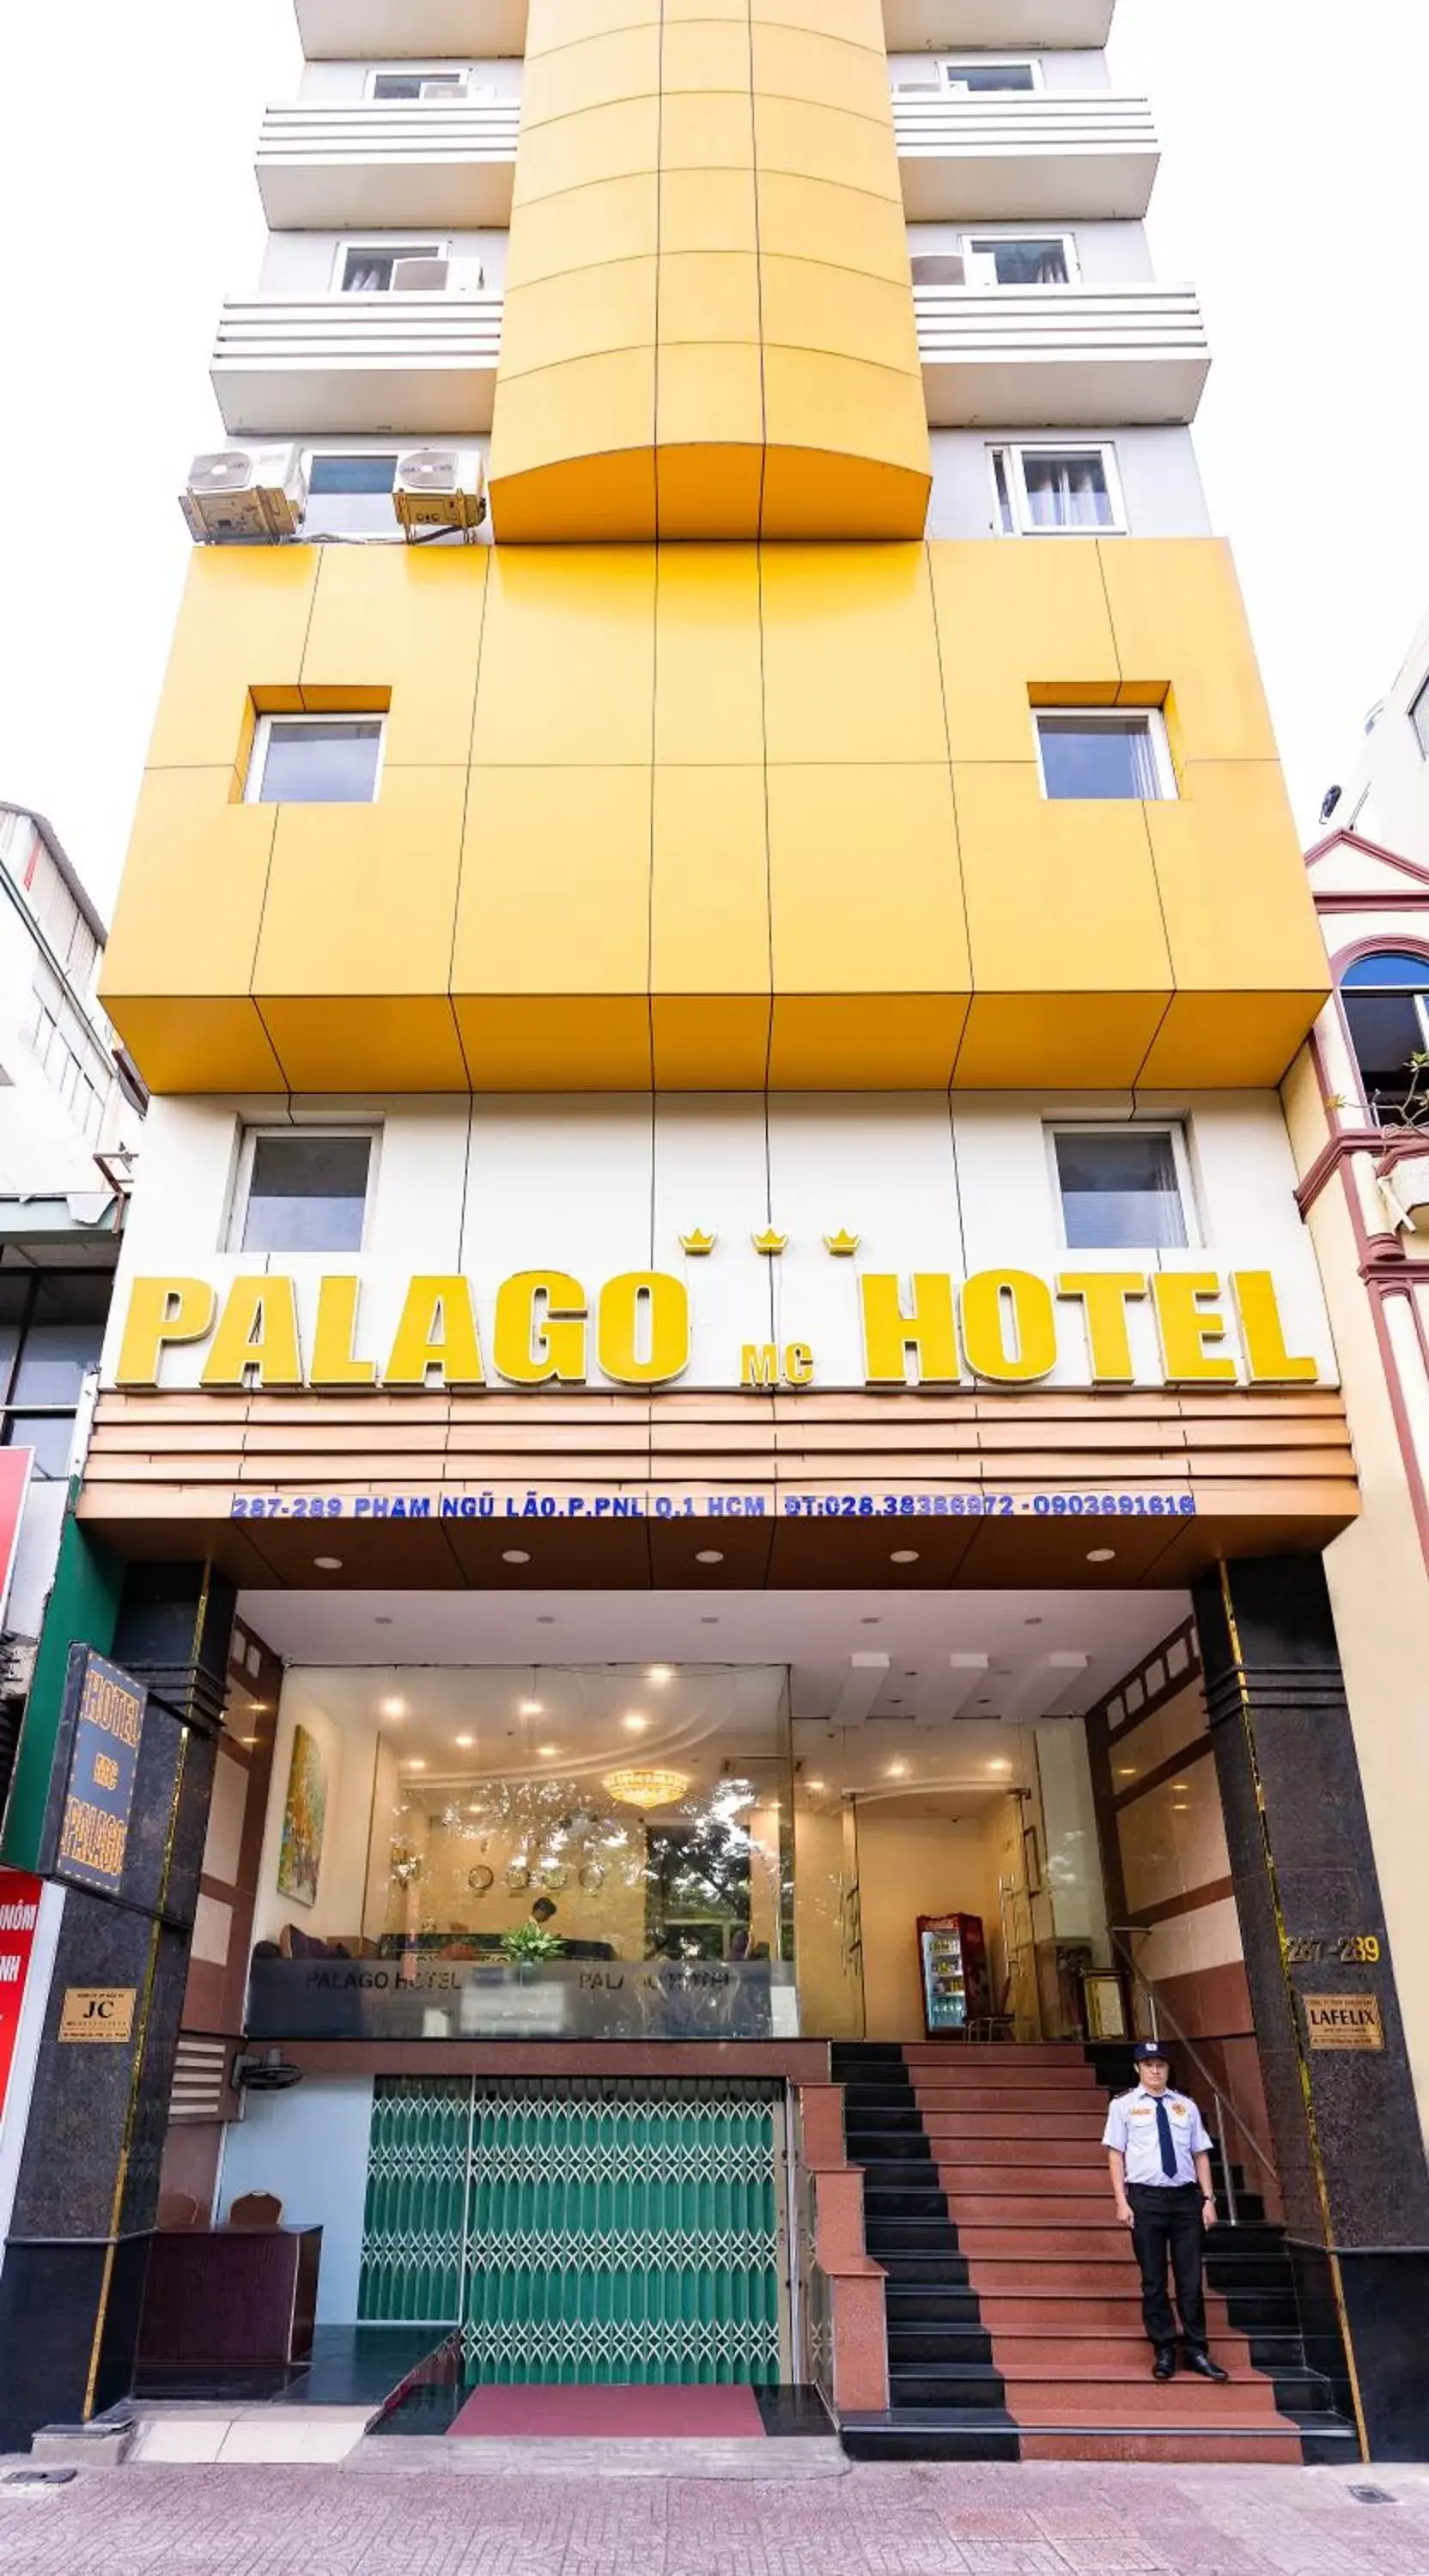 Property Building in Palago Hotel